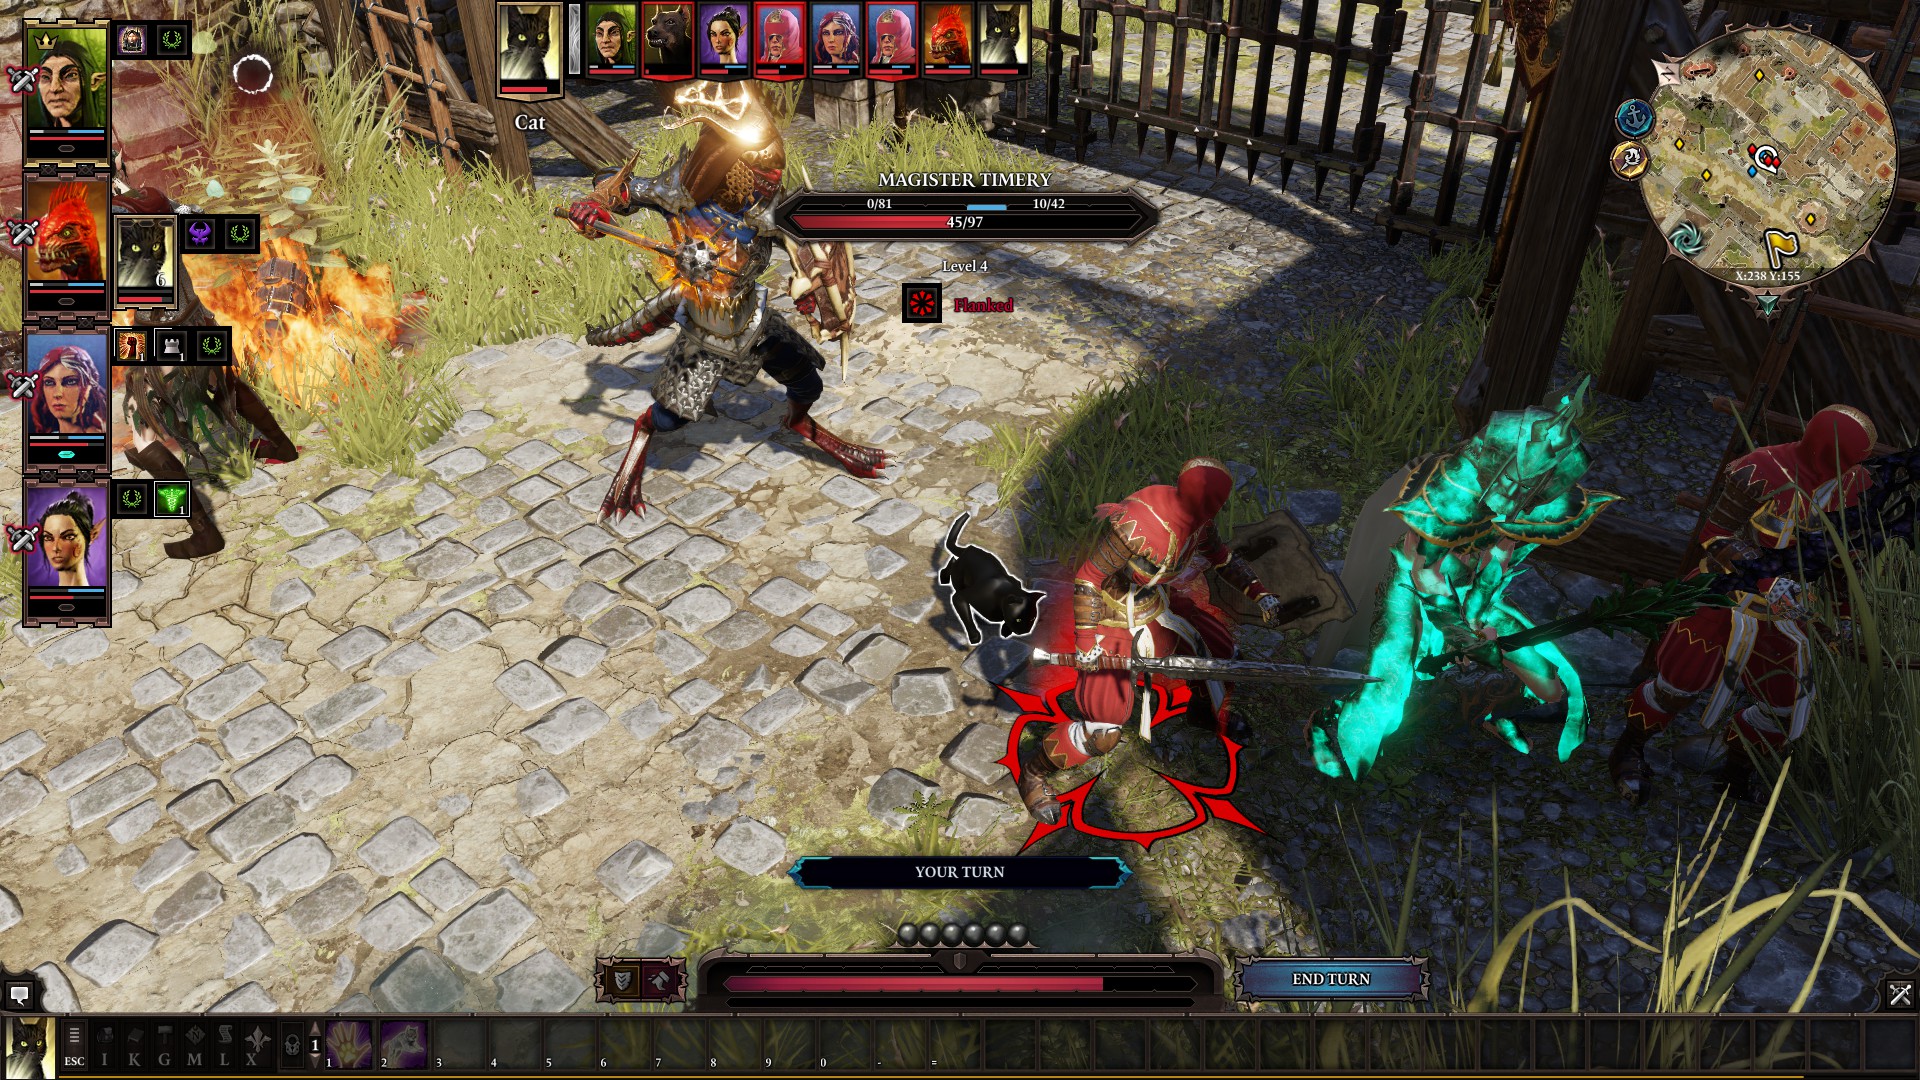 Tips For Playing Divinity: Original Sin 2